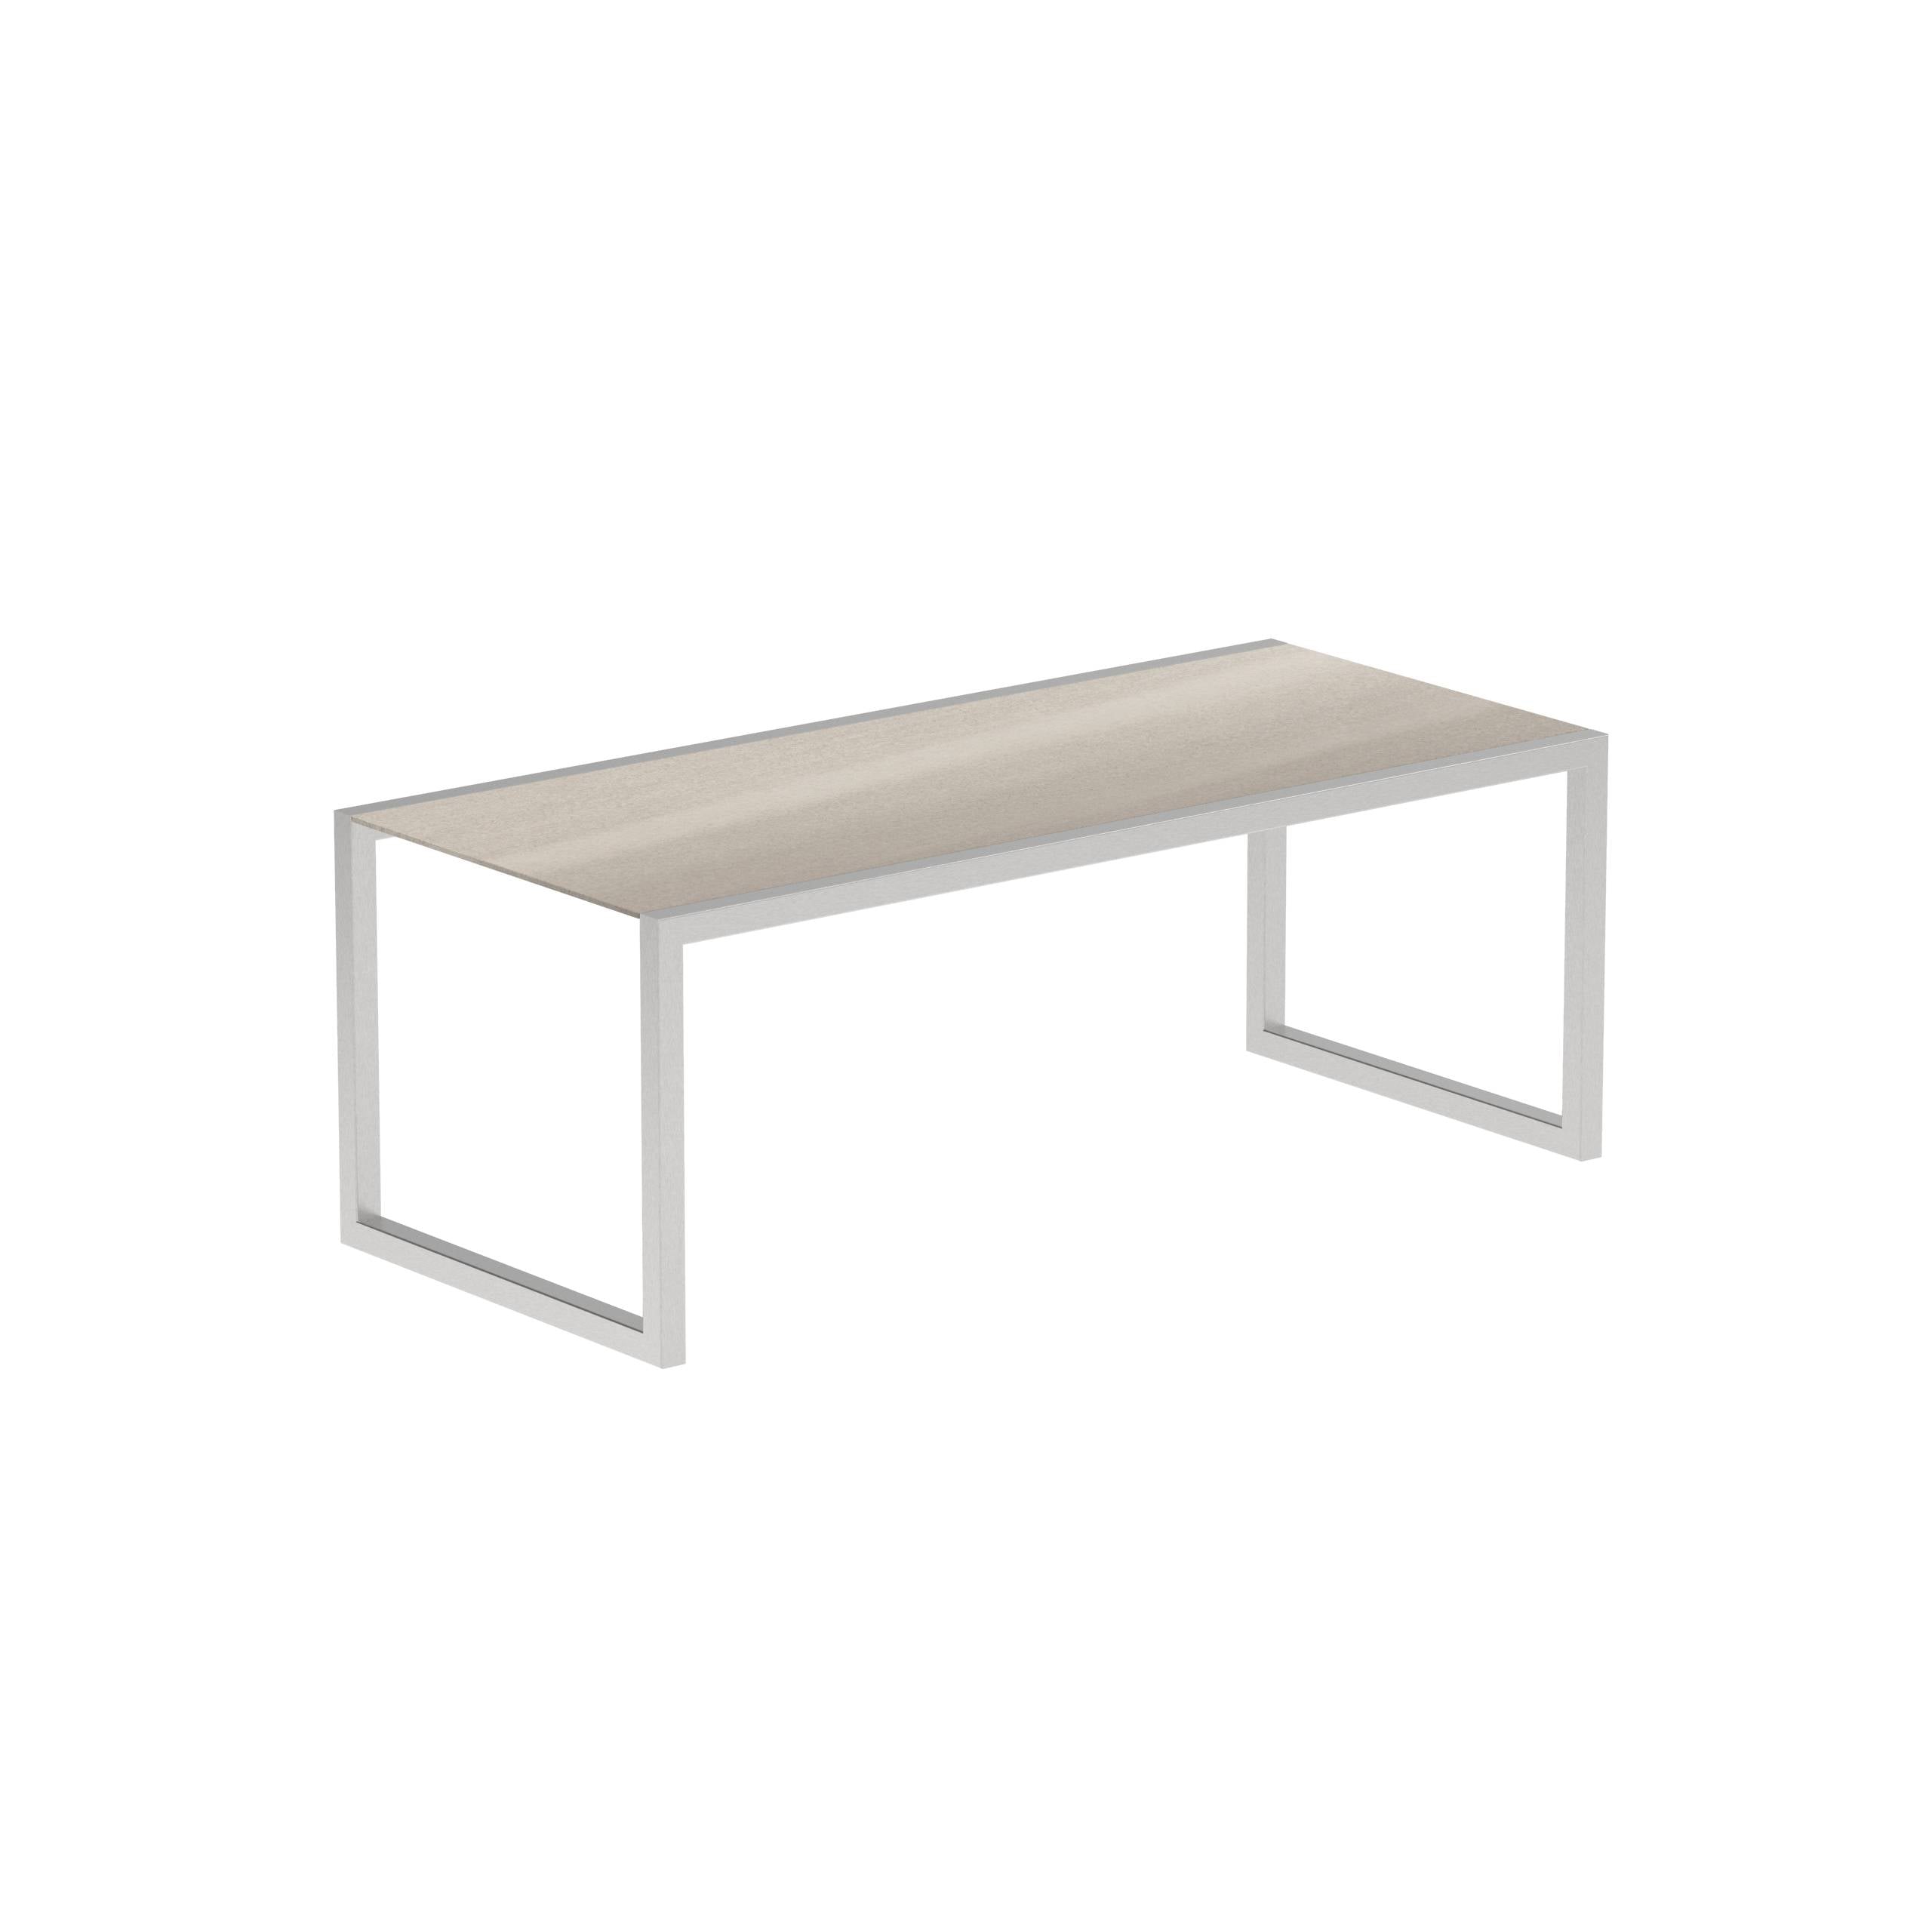 Ninix Table 200x90cm With Stainless Steel And Ceramic Taupe Grey